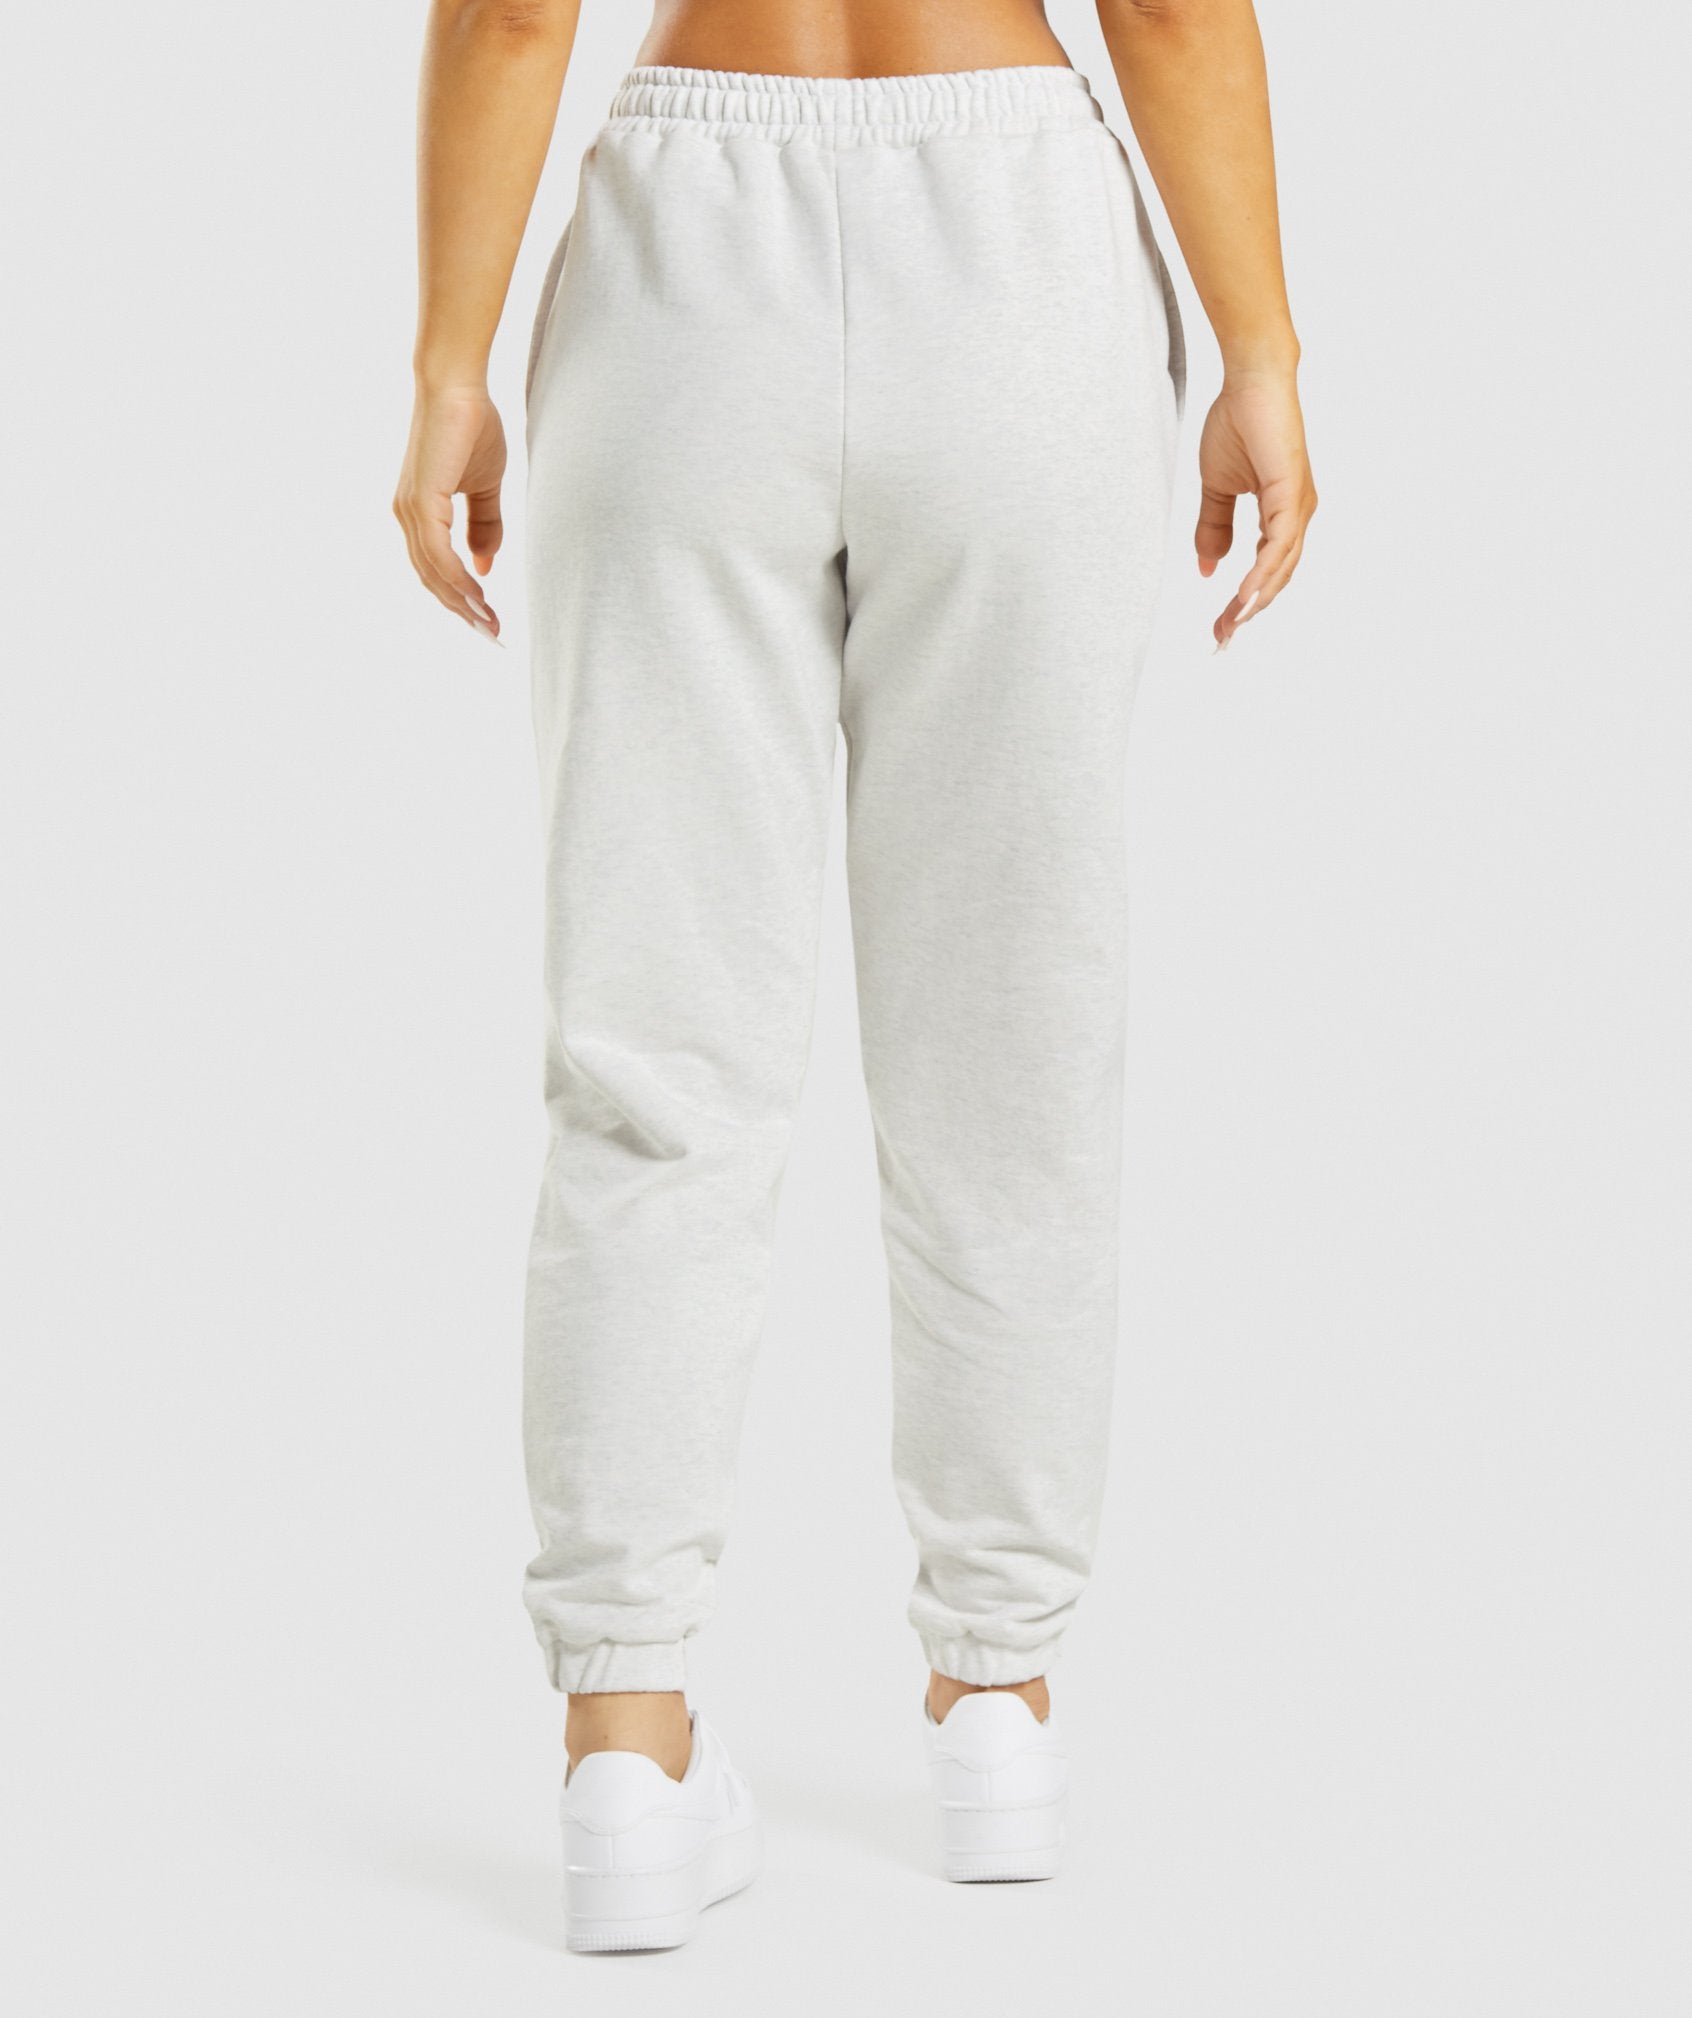 Rest Day Sweats Joggers in White Marl - view 2